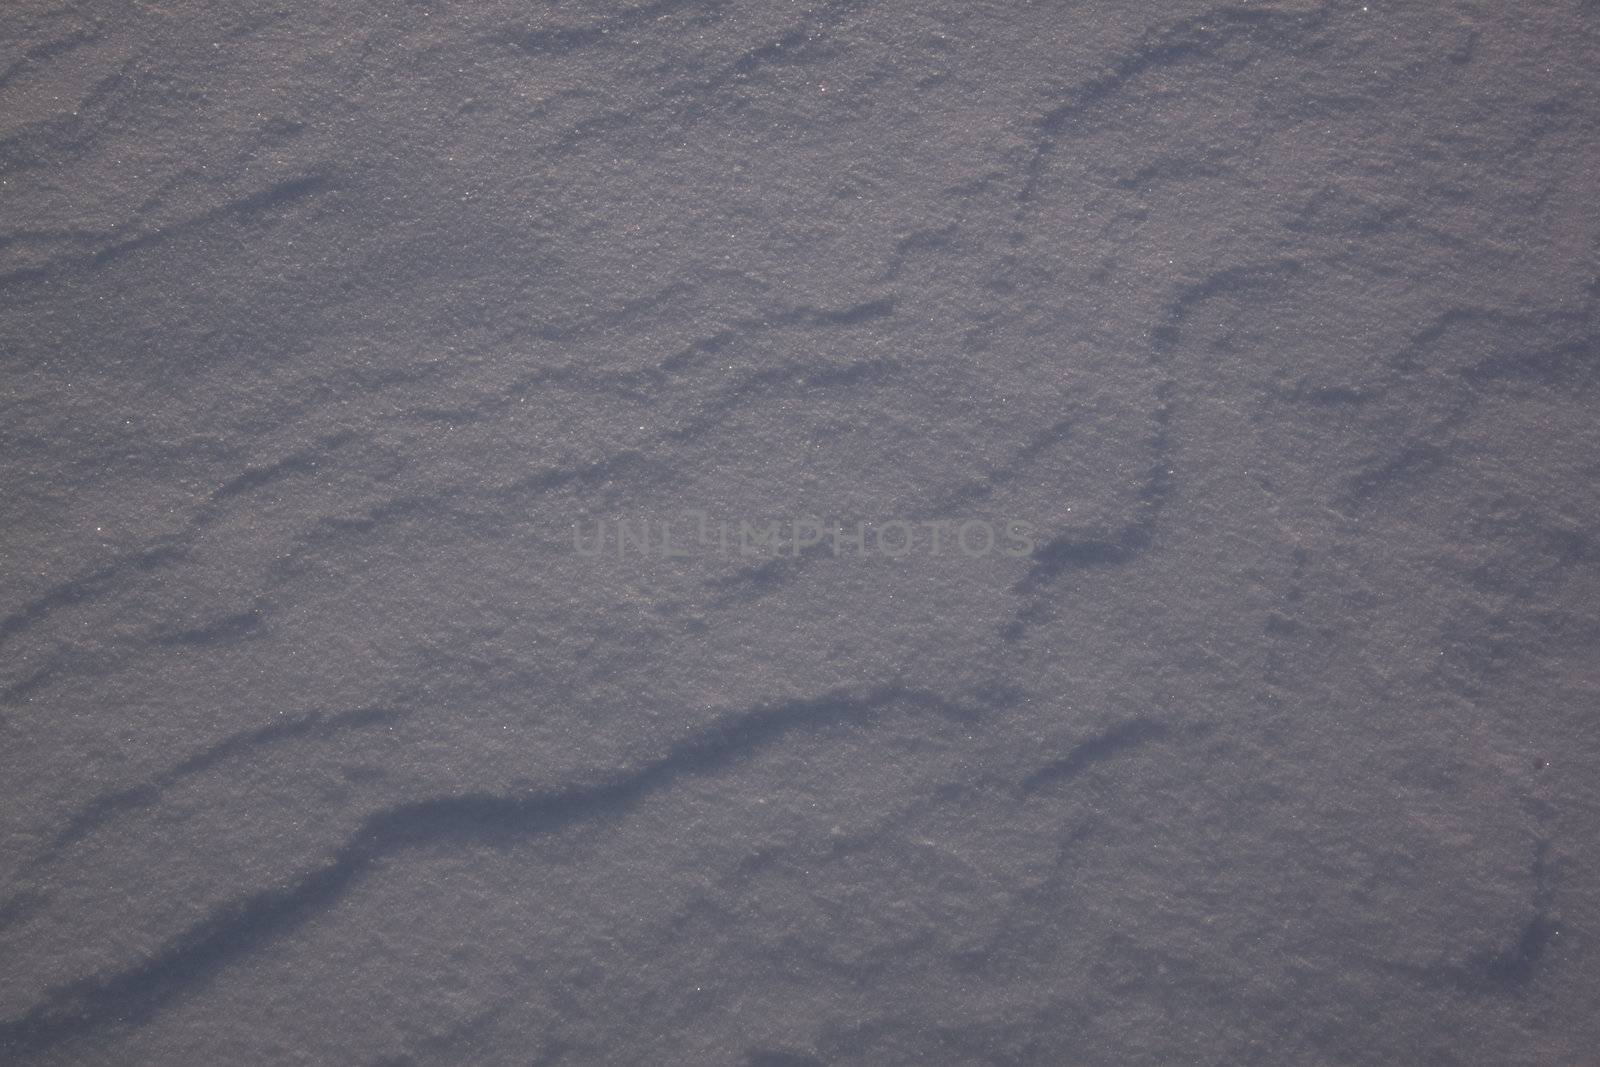 A snowy winter morning plain - countryside snow outdoor scene freezing